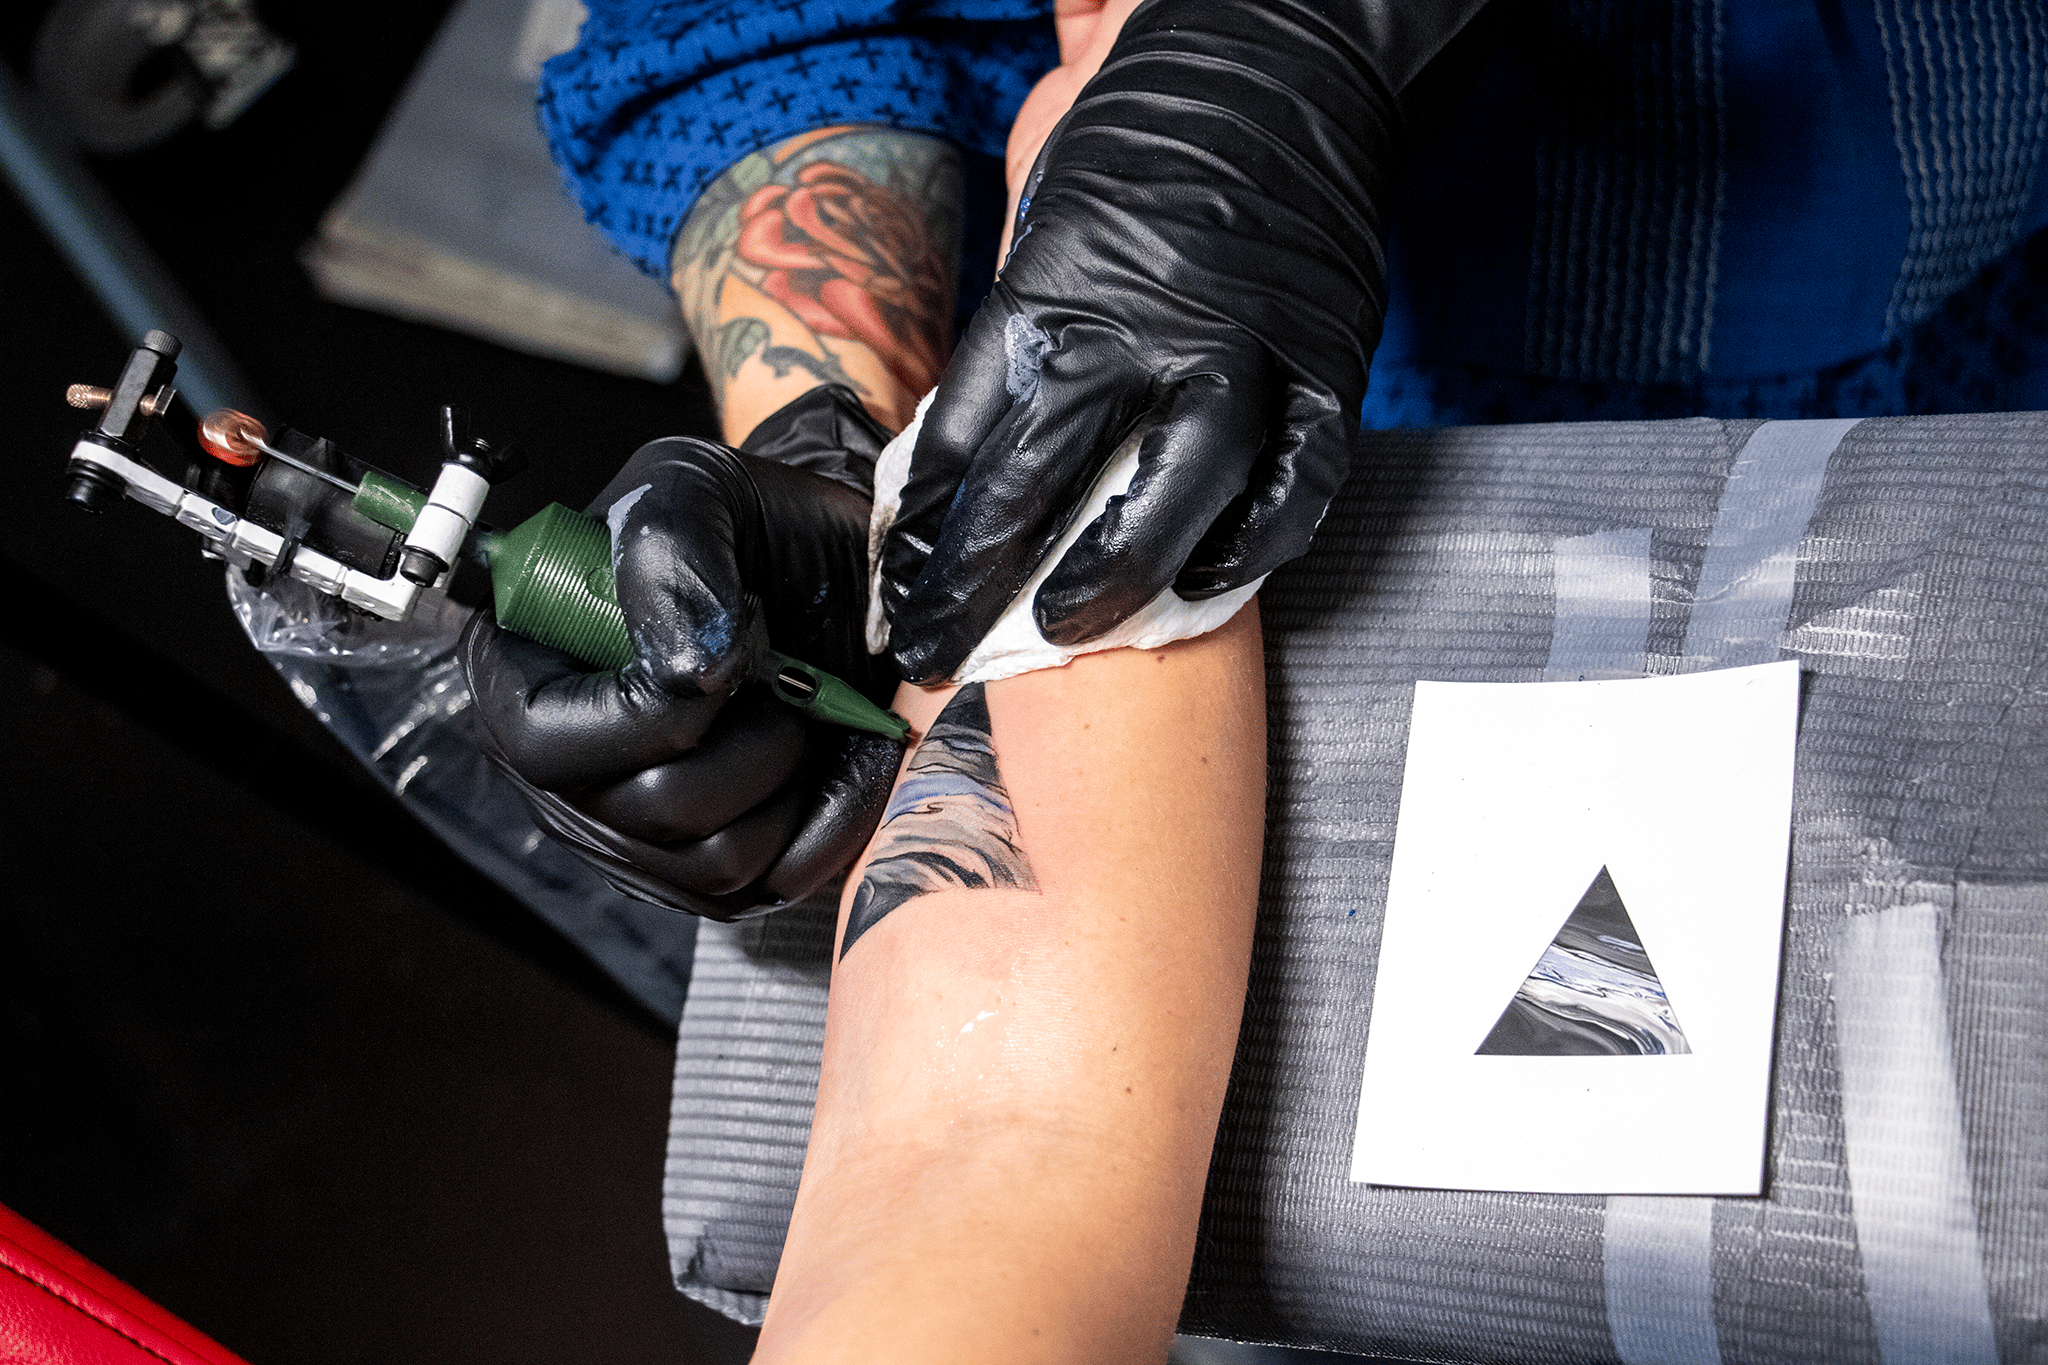 An arm lays on a table as a pair of black gloved hands tattoo right above the inner elbow a triangle - with a photograph of a triangle laying next to the arm.